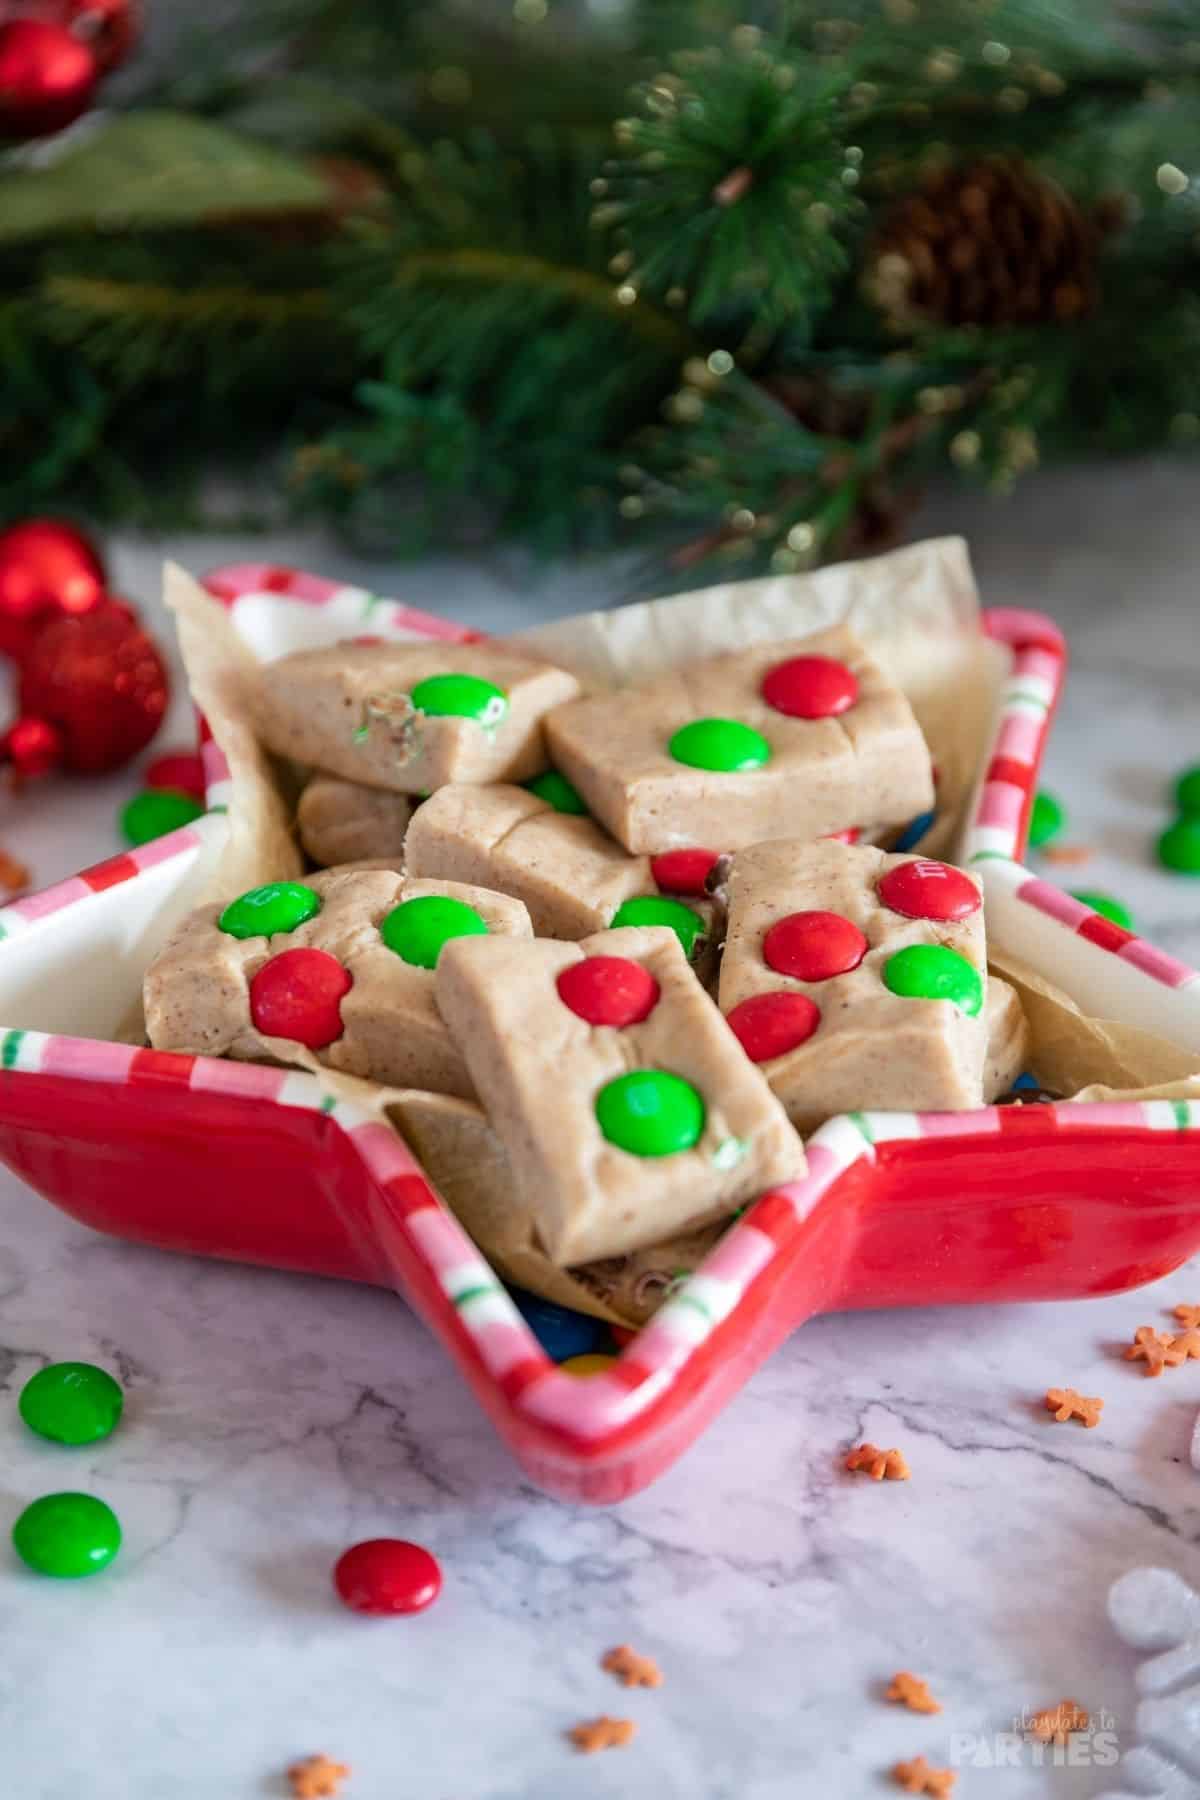 Gingerbread fudge is set in a small bowl for Christmas party guests to enjoy